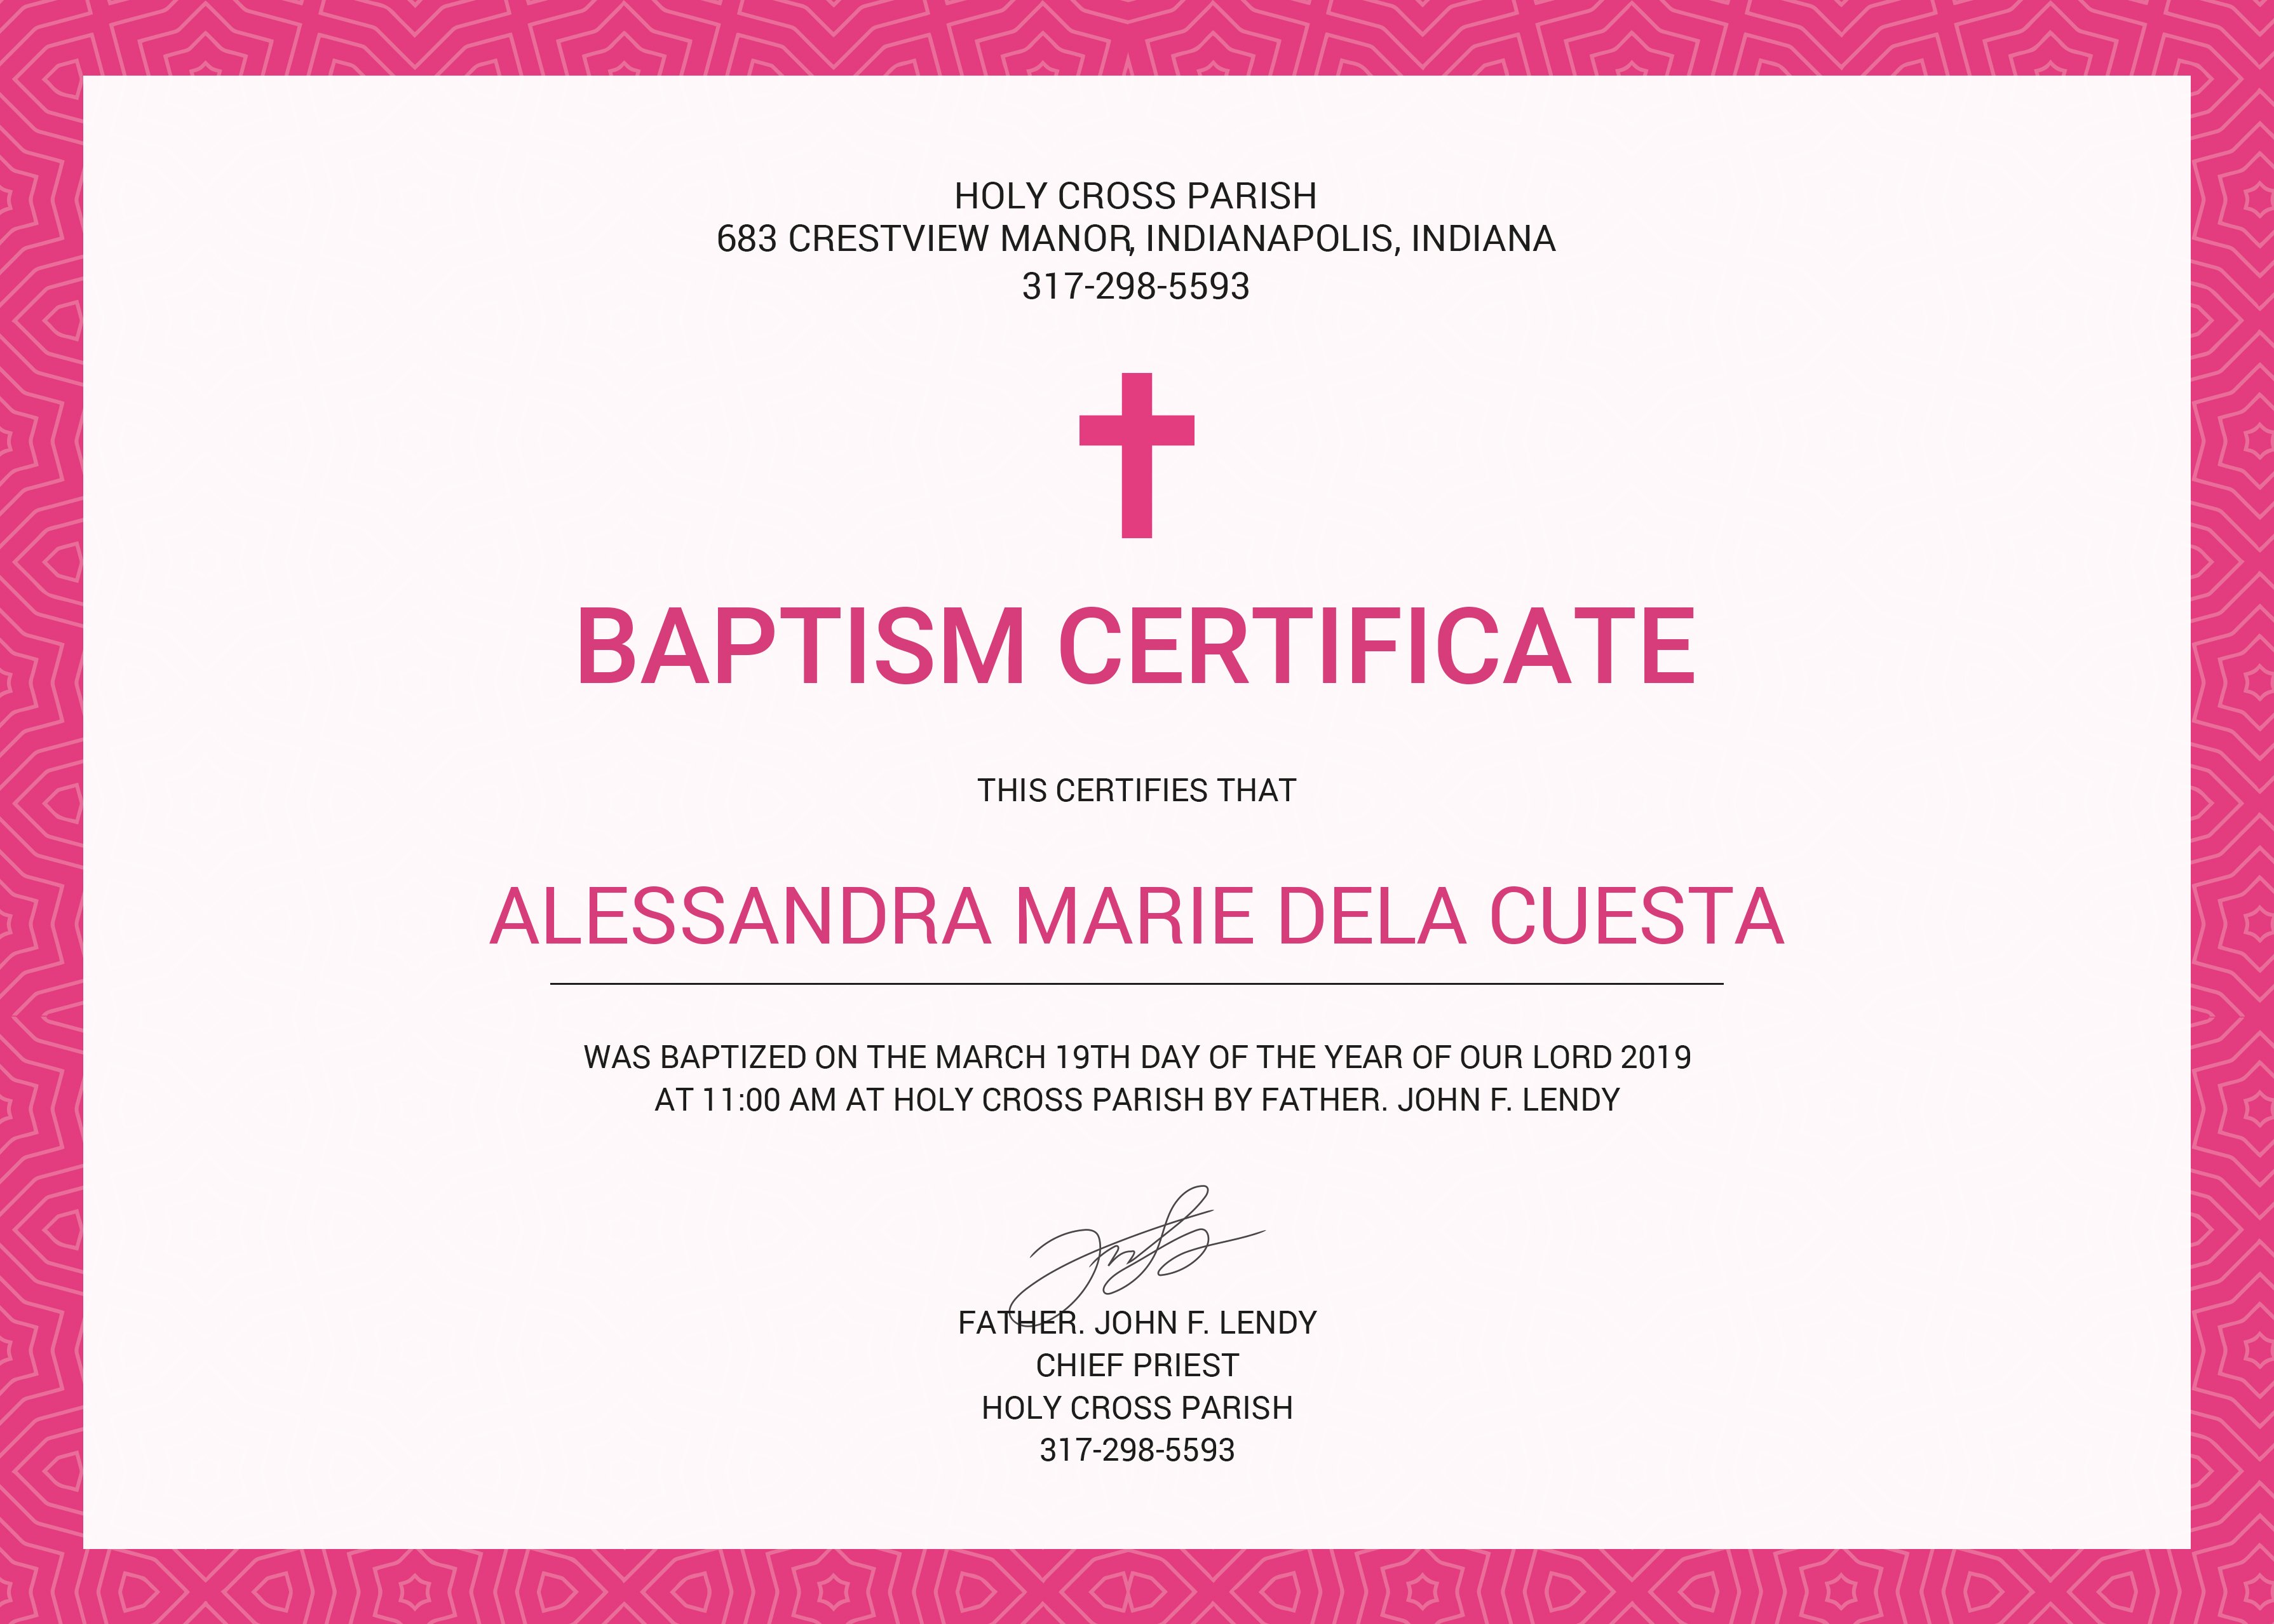 baptism-certificate-template-word-professional-template-for-business